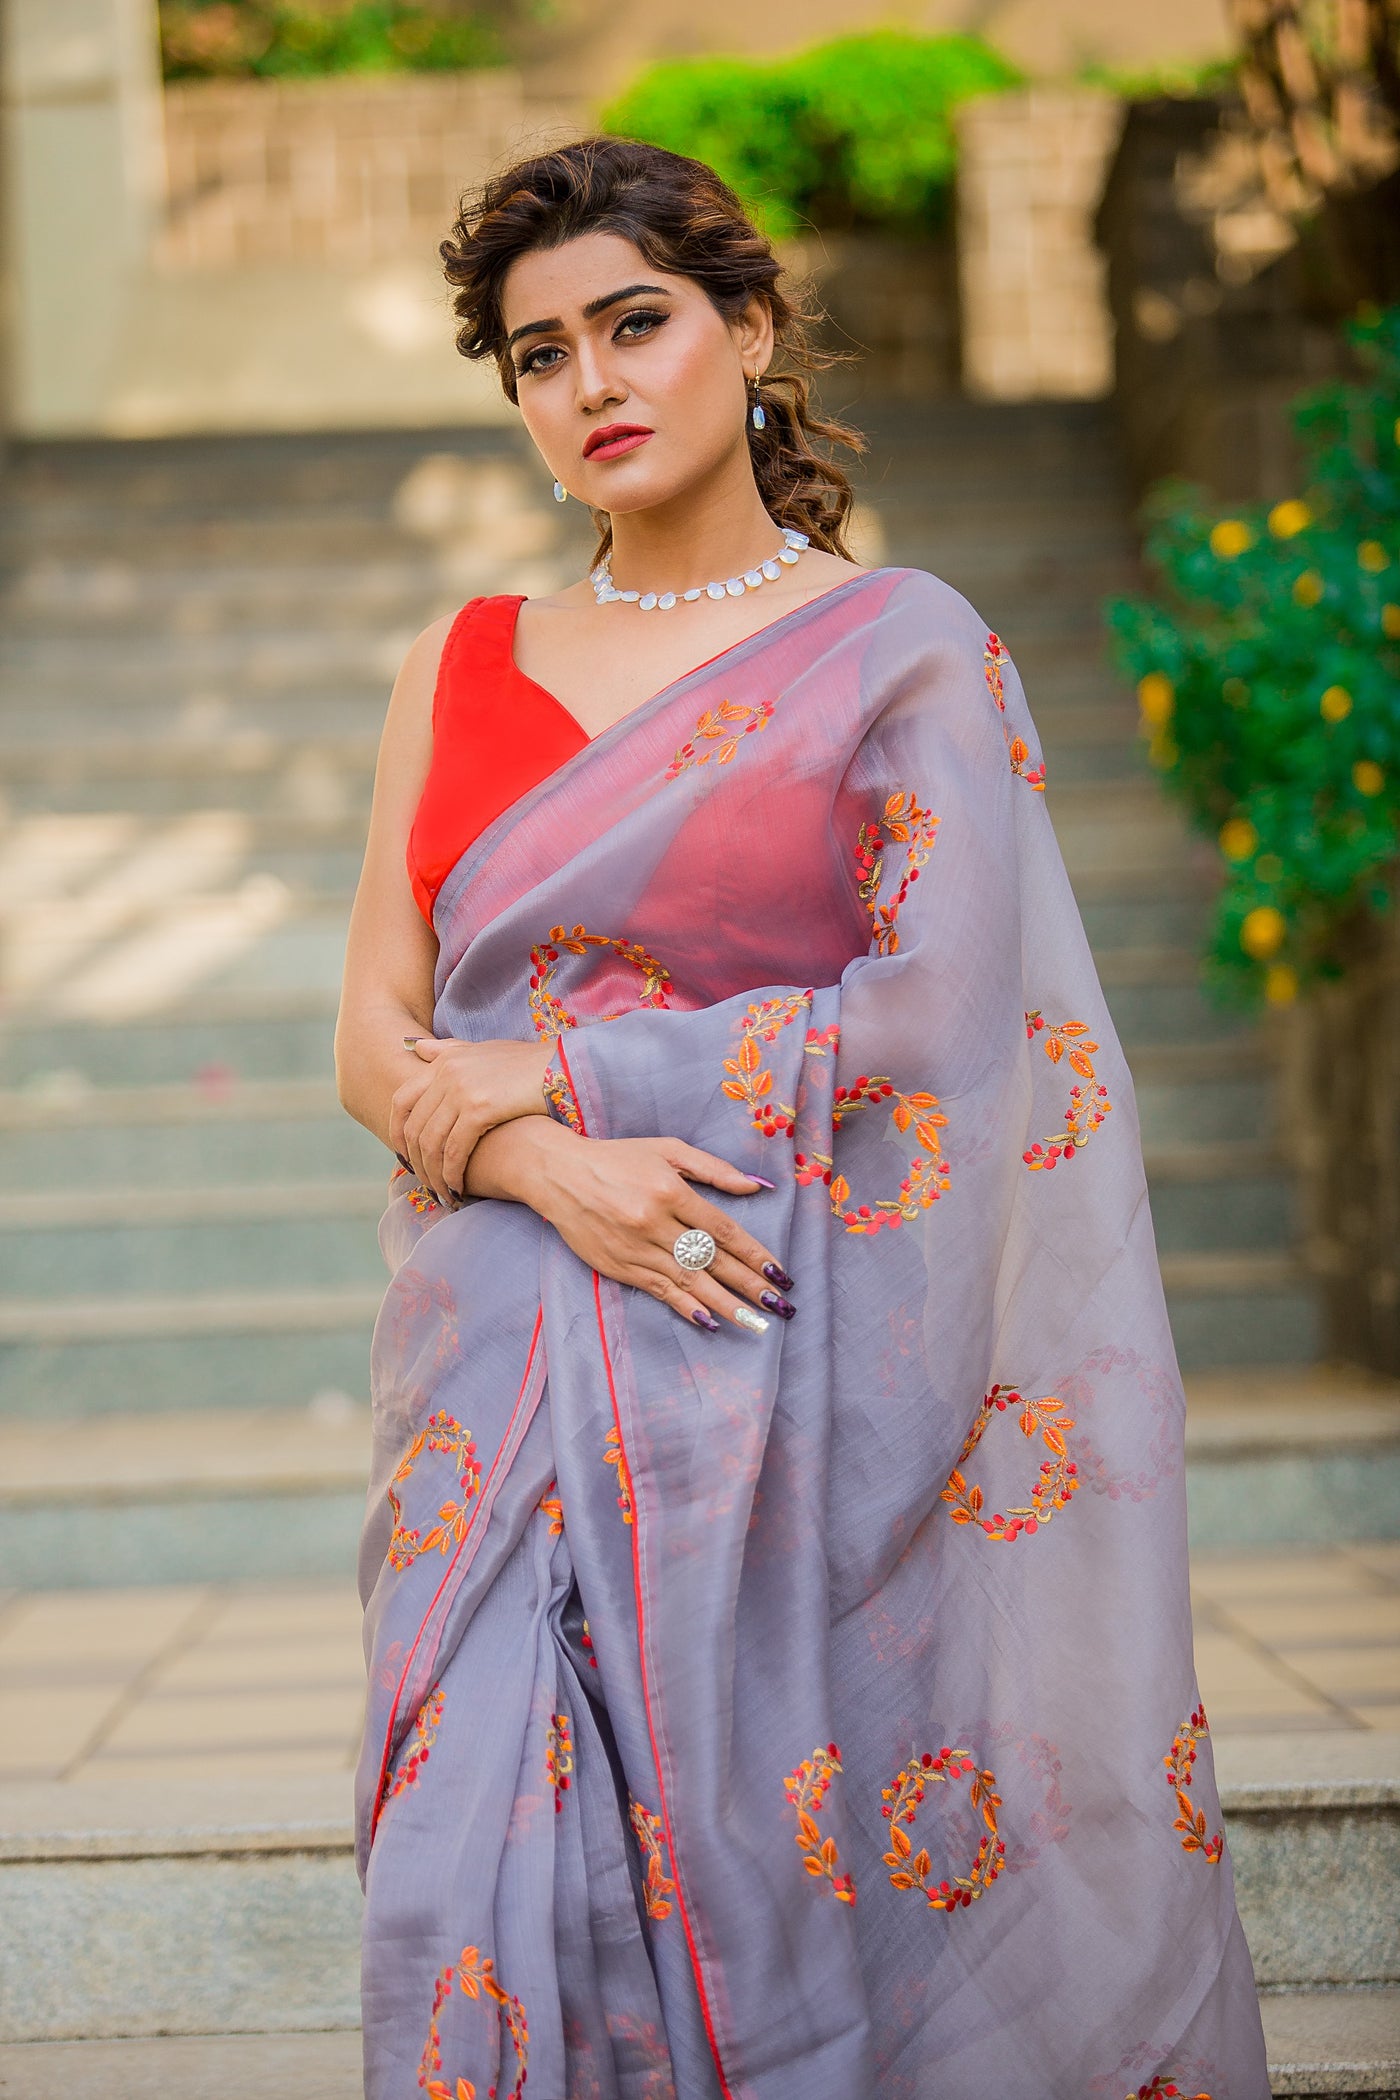 Gray Floral Organza Saree Indian Clothing in Denver, CO, Aurora, CO, Boulder, CO, Fort Collins, CO, Colorado Springs, CO, Parker, CO, Highlands Ranch, CO, Cherry Creek, CO, Centennial, CO, and Longmont, CO. NATIONWIDE SHIPPING USA- India Fashion X